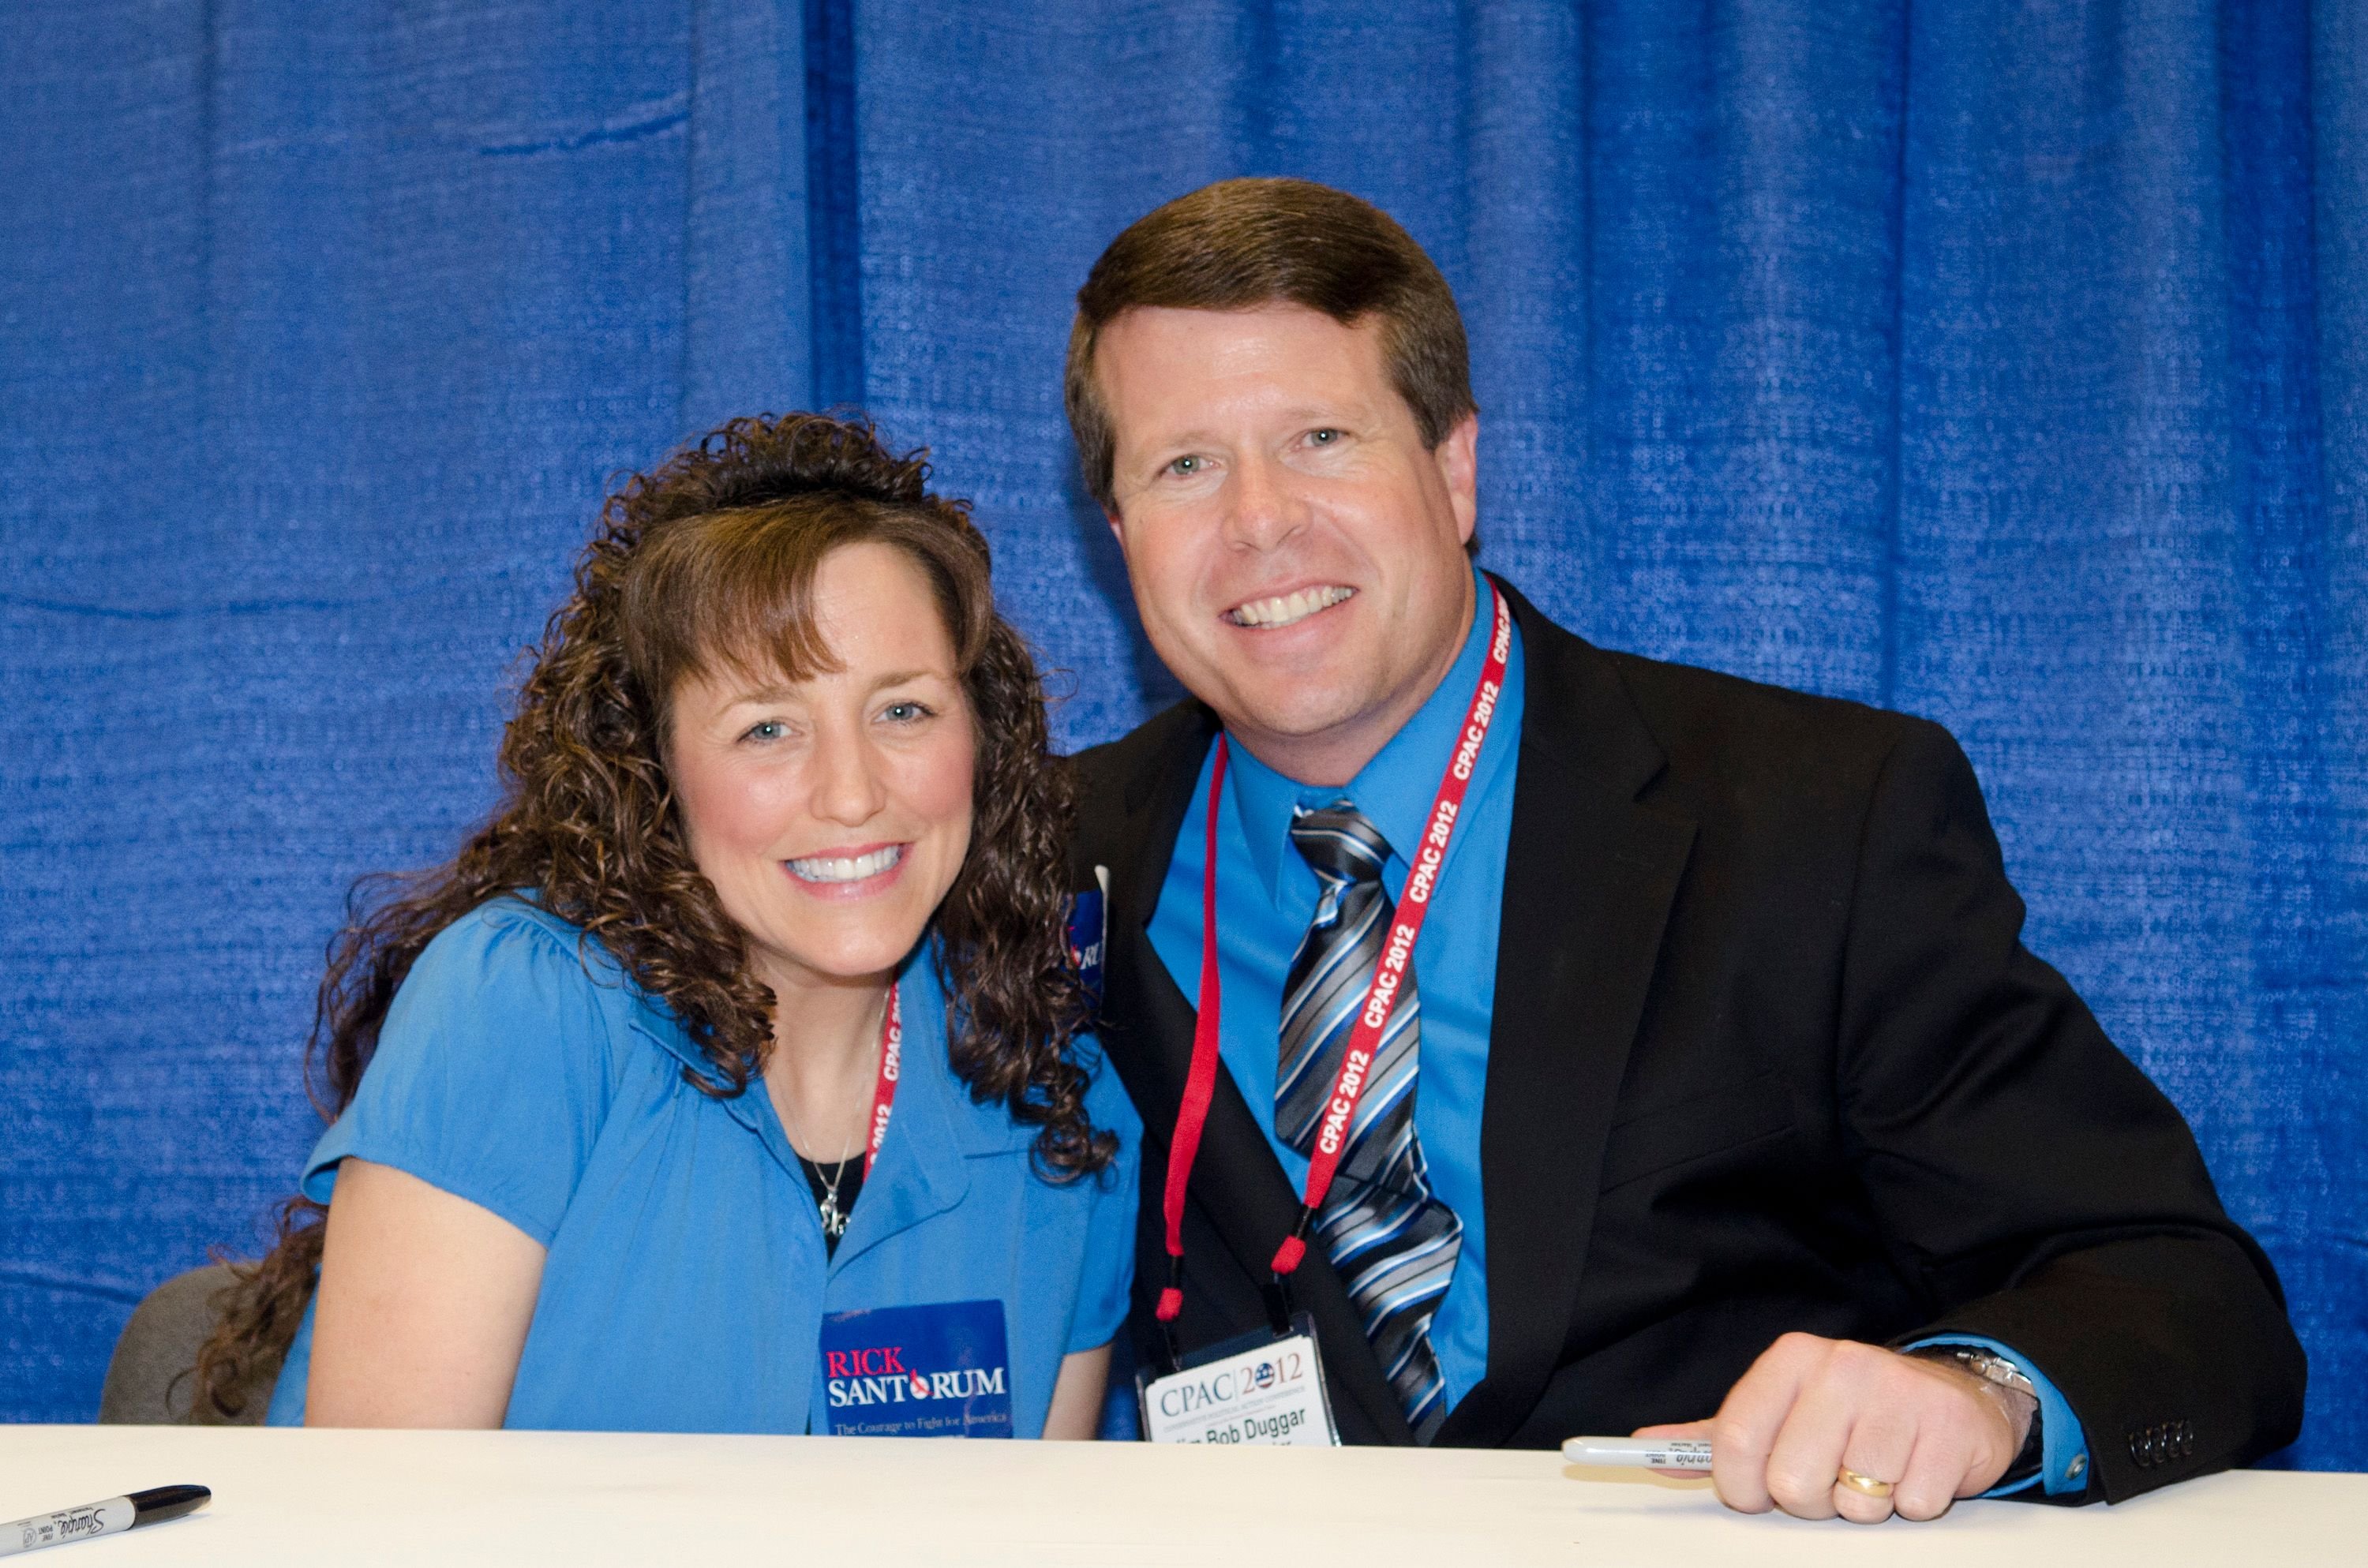 Michelle Duggar and Jim Bob Duggar during the Conservative Political Action Conference (CPAC) on February 10, 2012. | Source: Getty Images